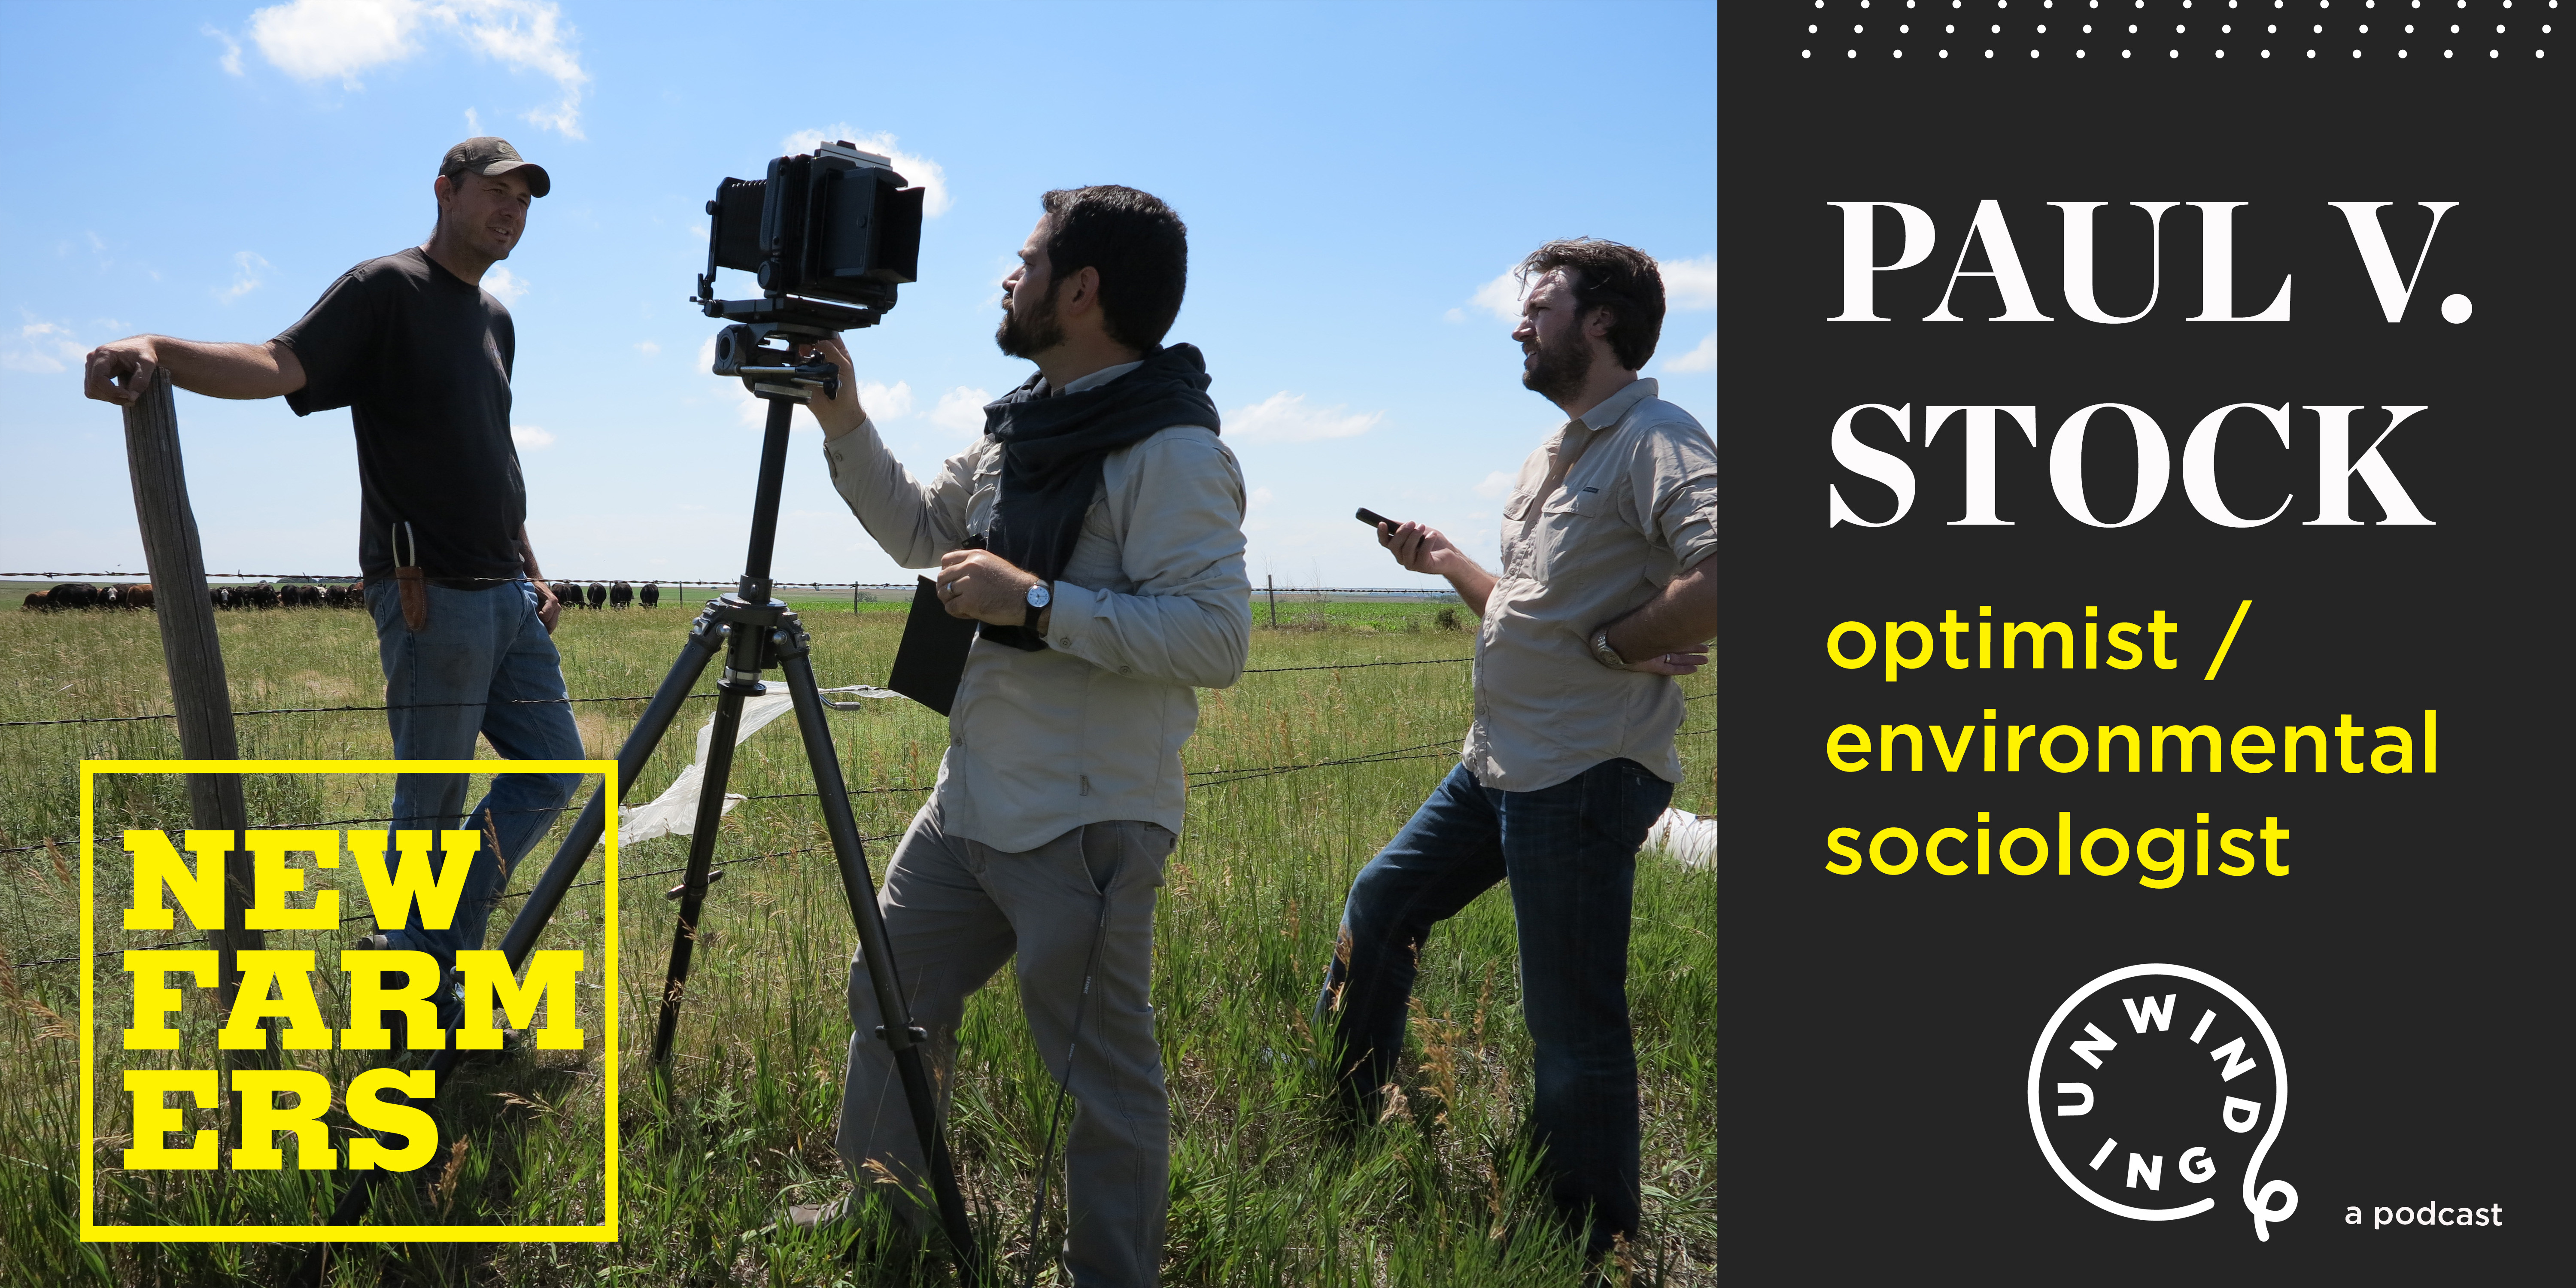 Image shows D. Bryon Darby photographing a farmer by a fence as Paul Stock watches on. Text: Paul V. Stock. Optimist / environmental sociologist. Logo: Unwinding, a podcast